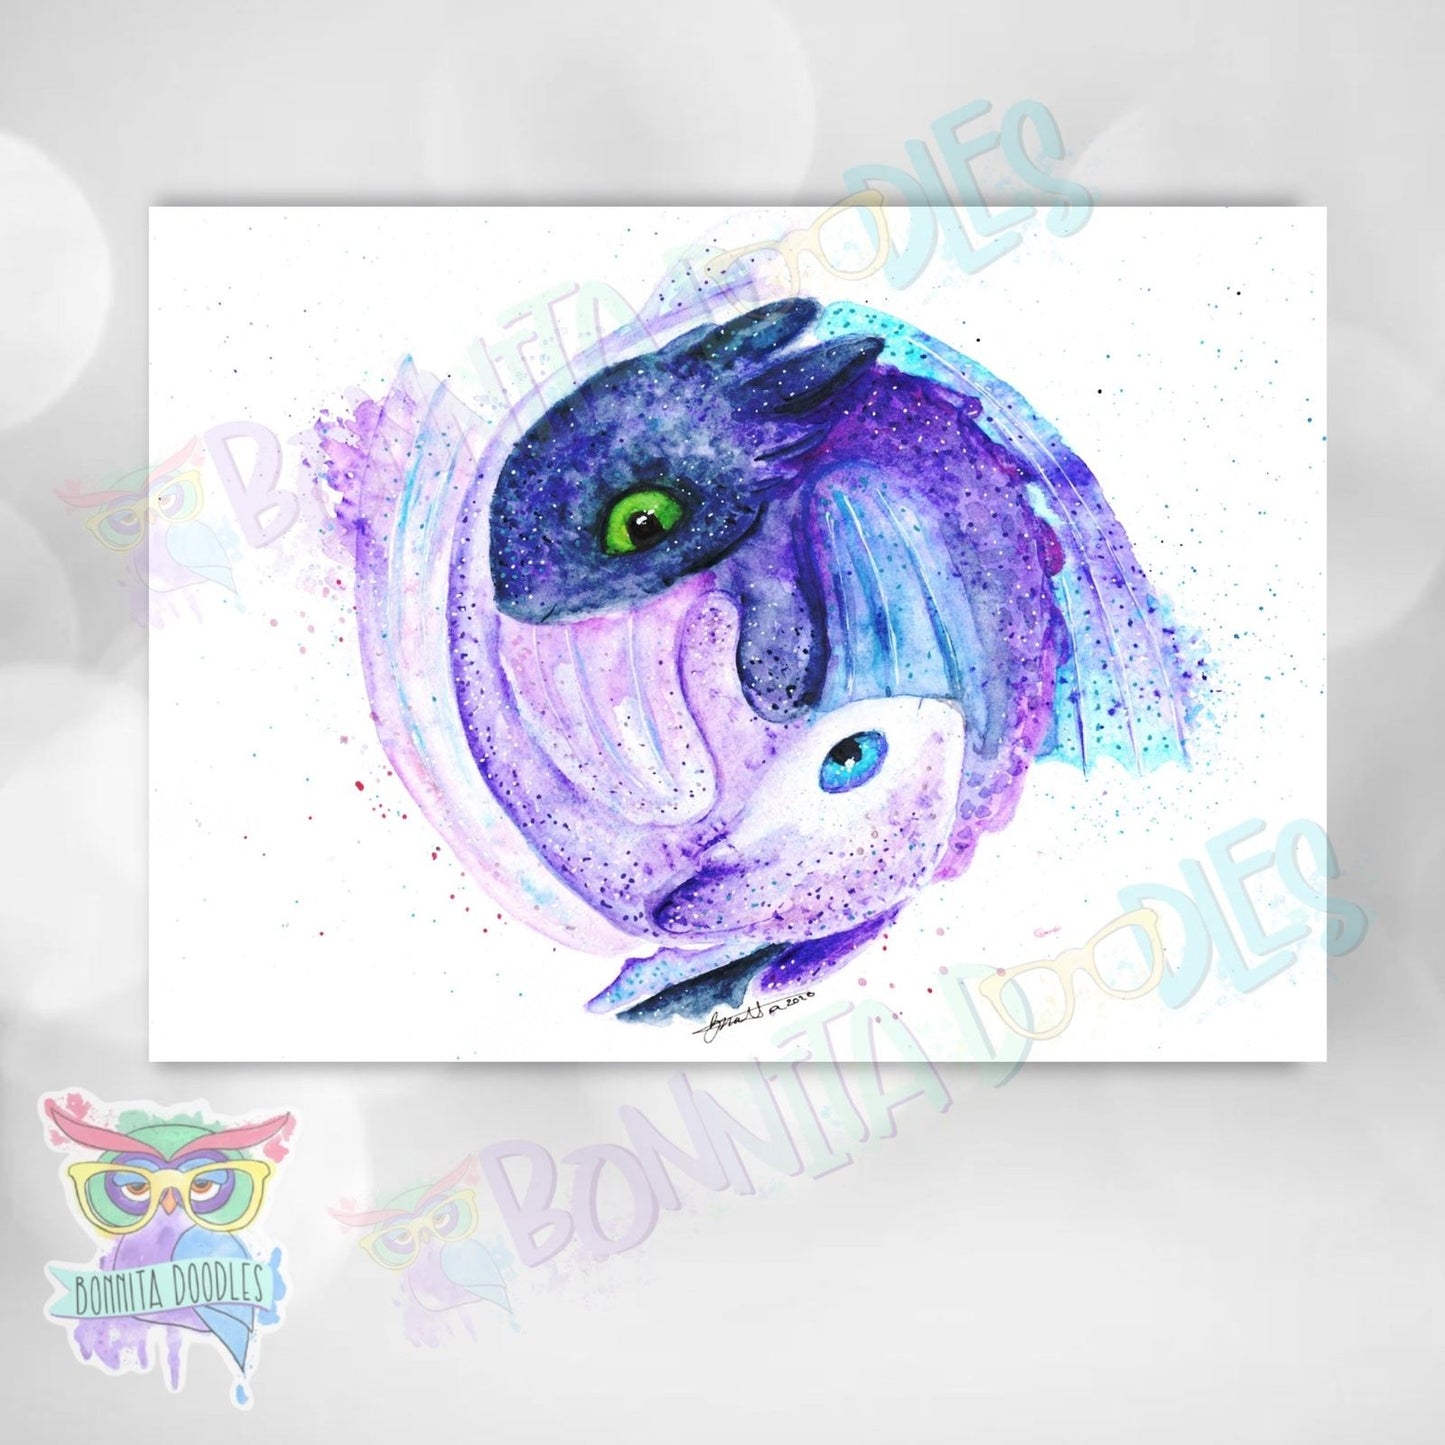 Ying Yang toothless Original art and signed prints